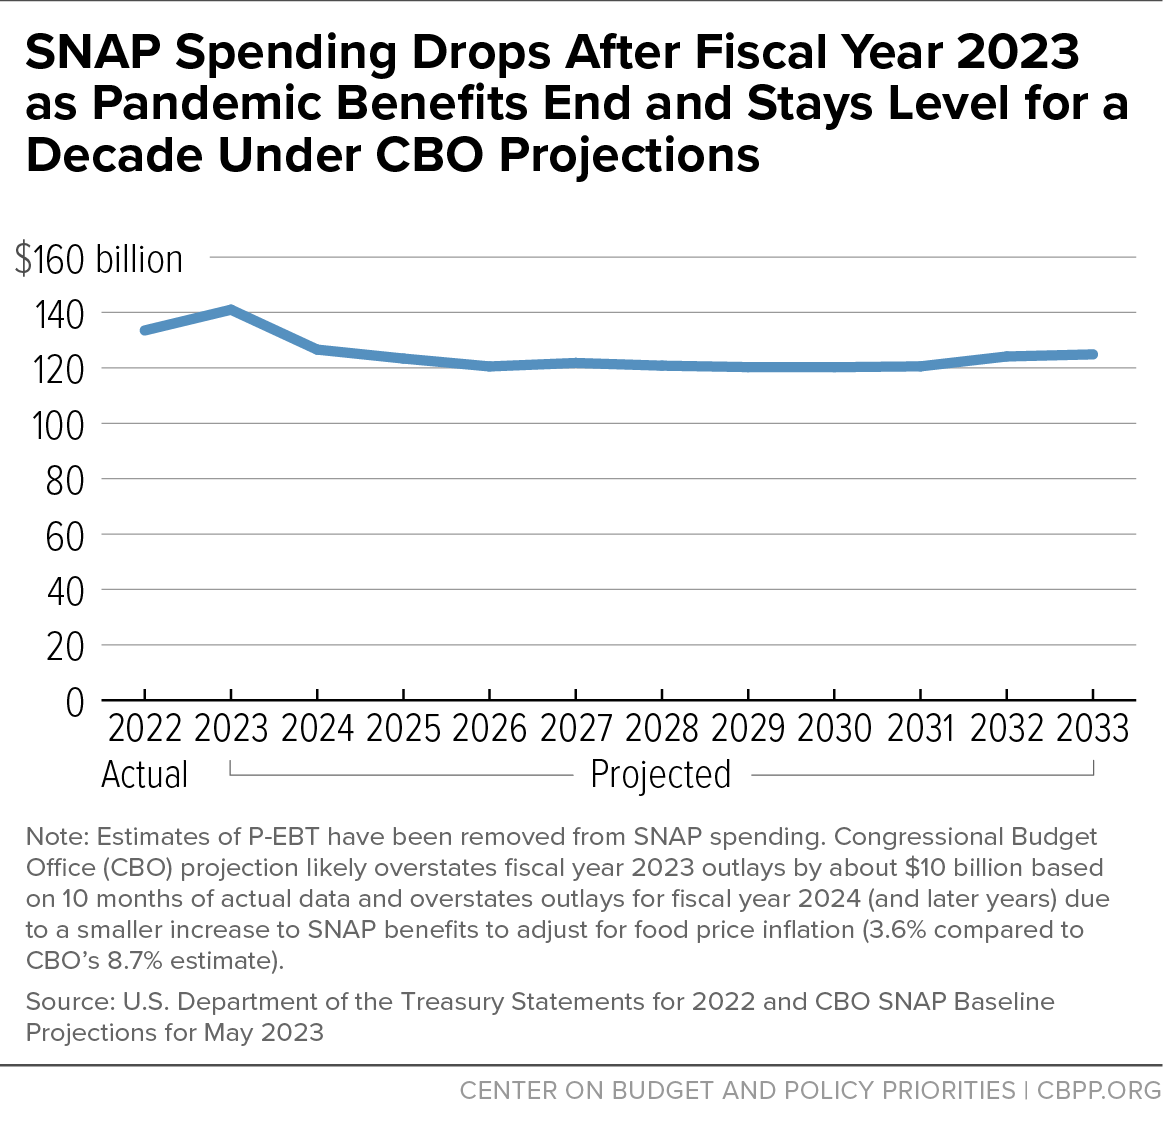 SNAP Spending Drops After Fiscal Year 2023 as Pandemic Benefits End and Stays Level for a Decade Under CBO Projections